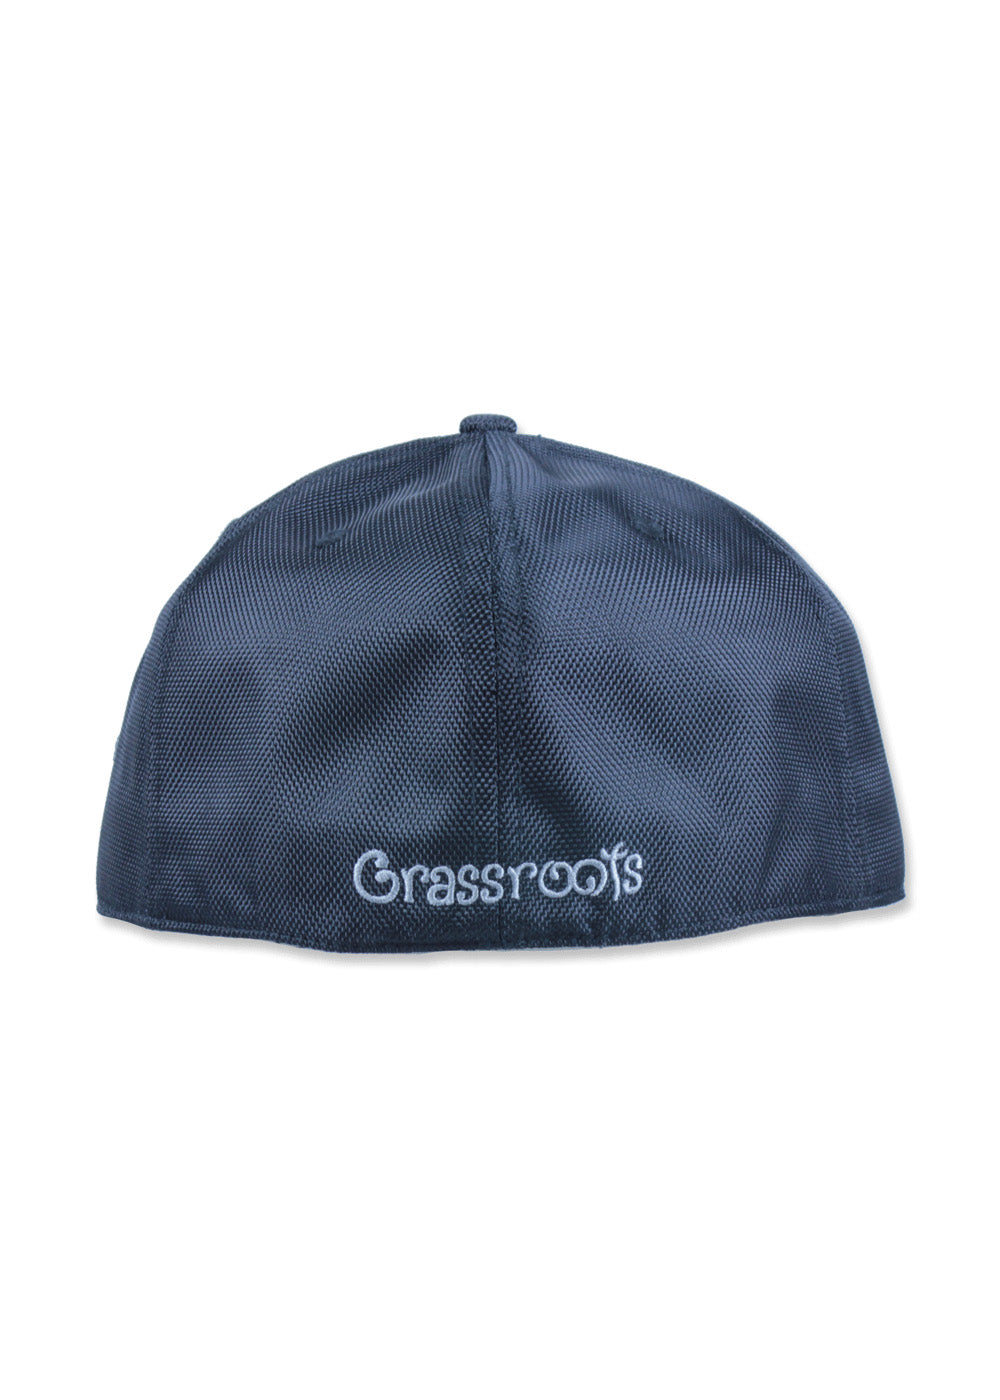 Grassroots Glassroots 2016 Ballistic Fitted Hat